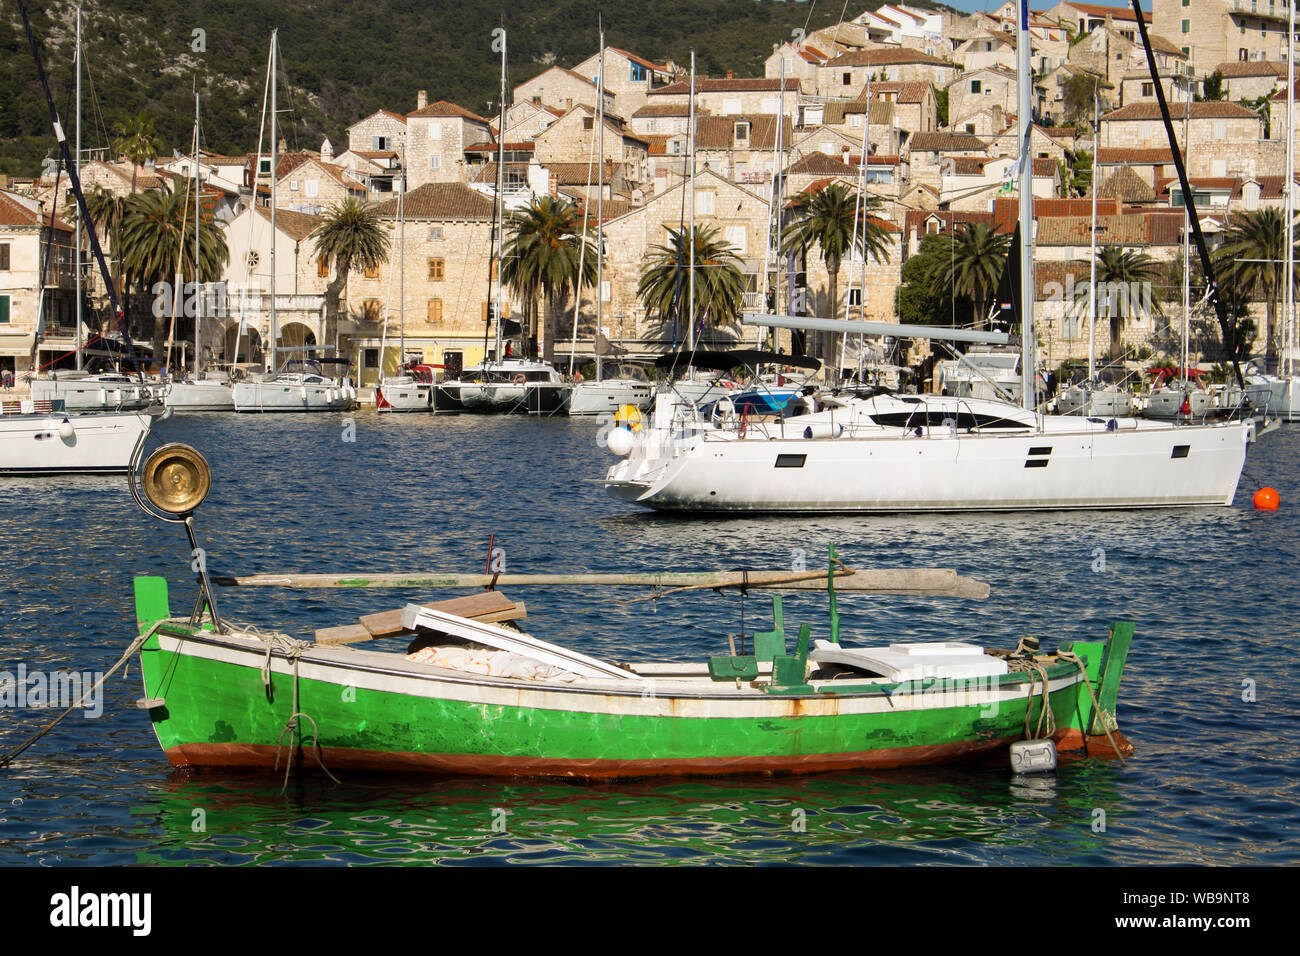 Hvar town marina with different boats in it, Croatia Stock Photo